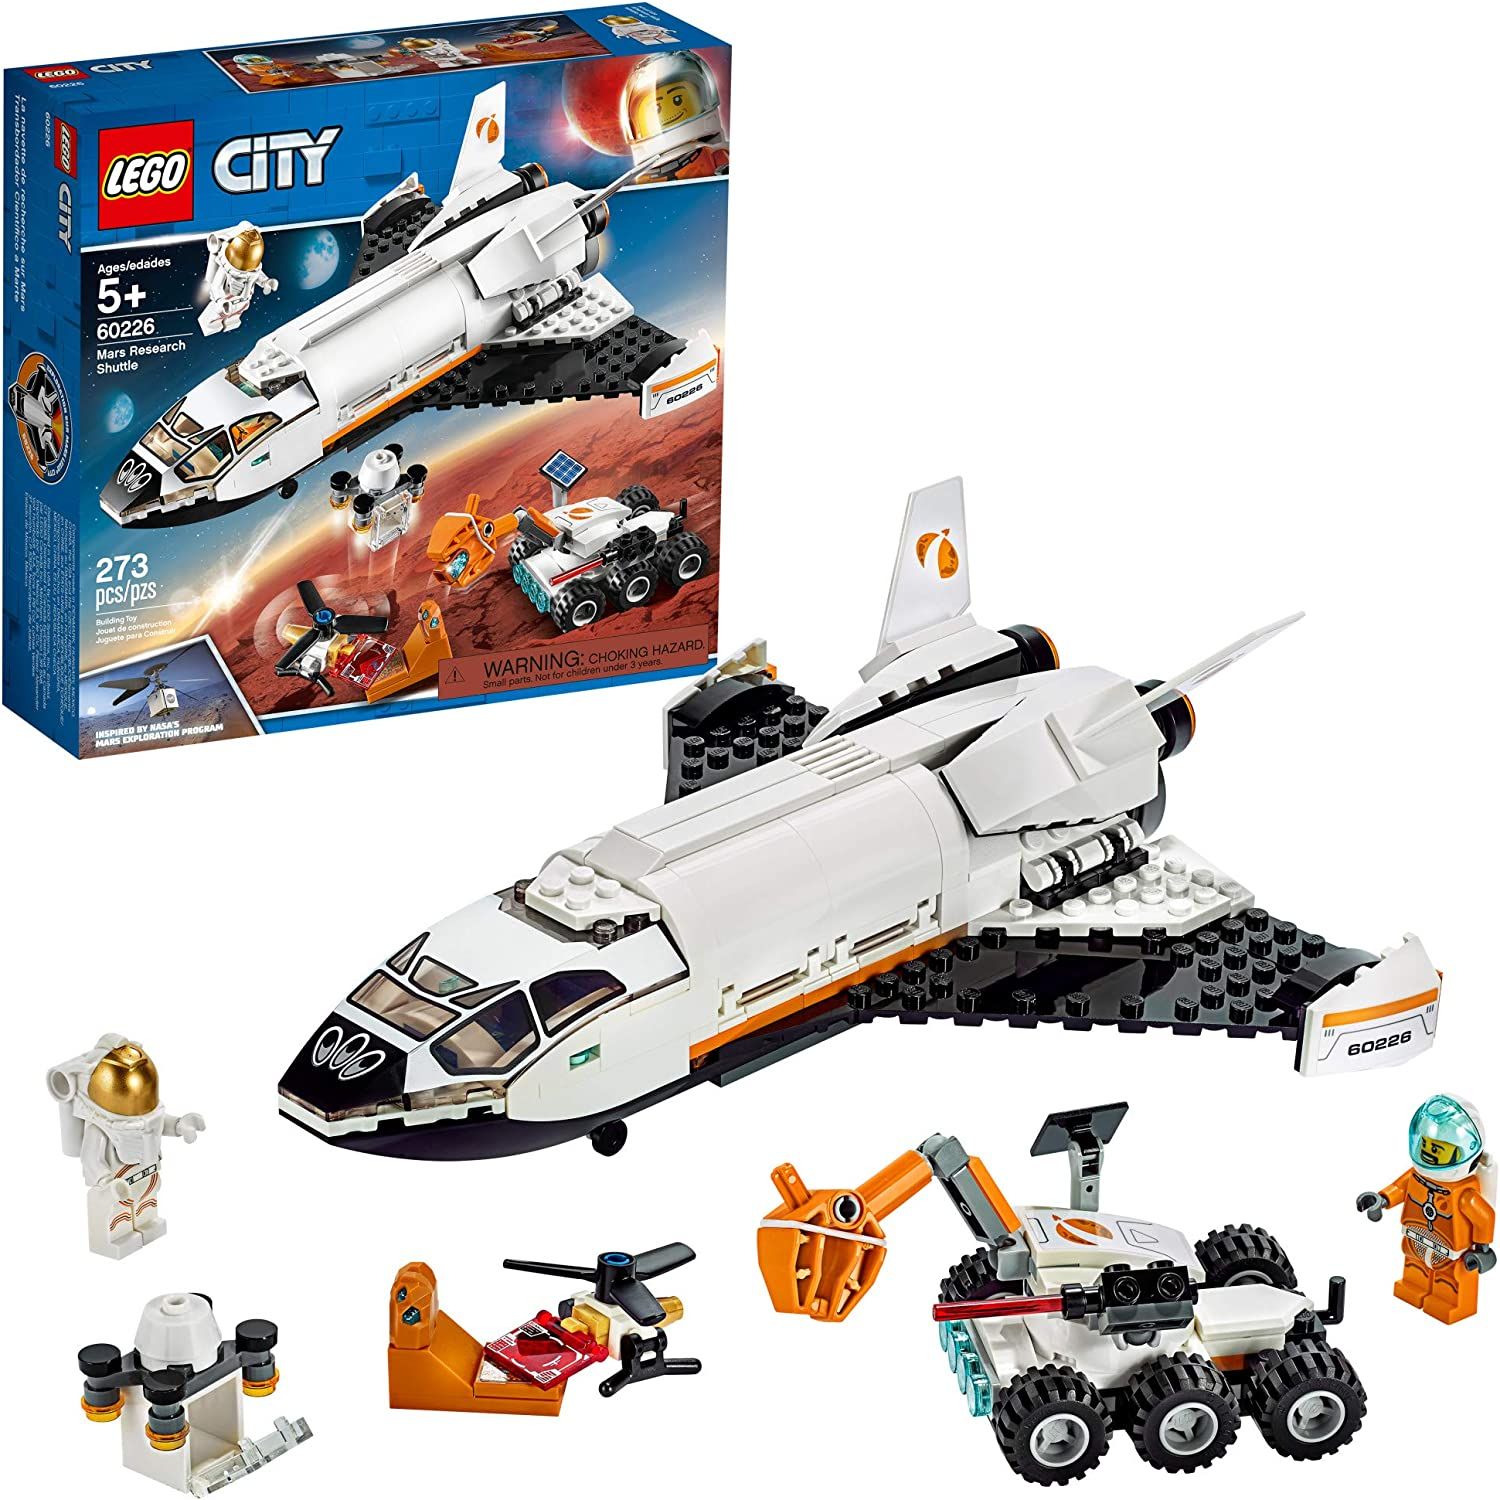 LEGO-City-Space-Mars-Research-Shuttle-1-1